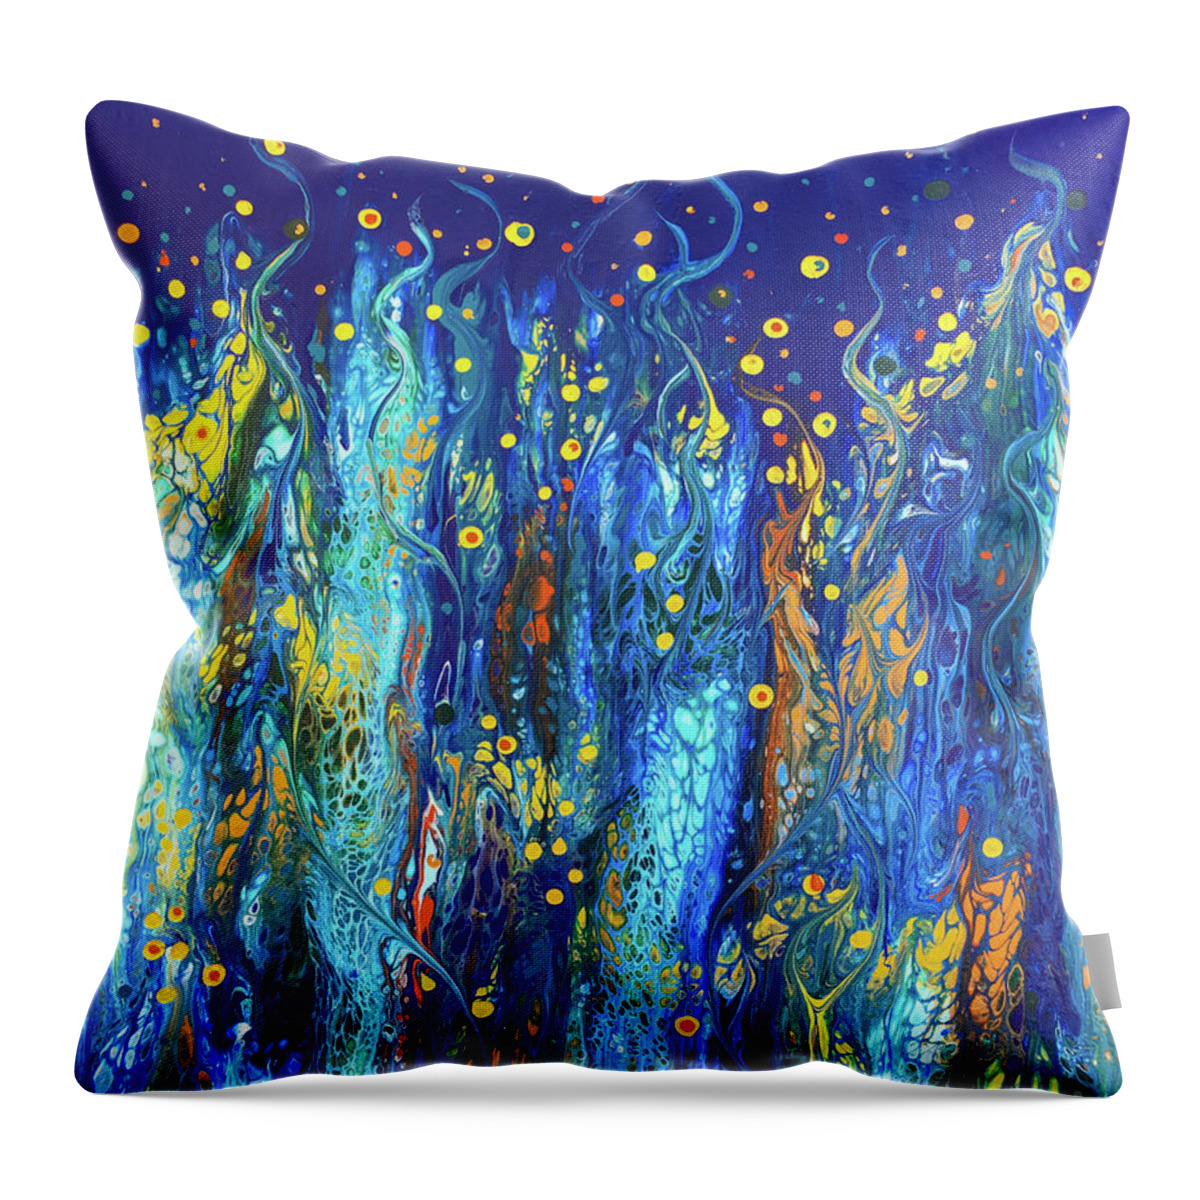 Undersea Throw Pillow featuring the painting Undersea Circus by Lucy Arnold